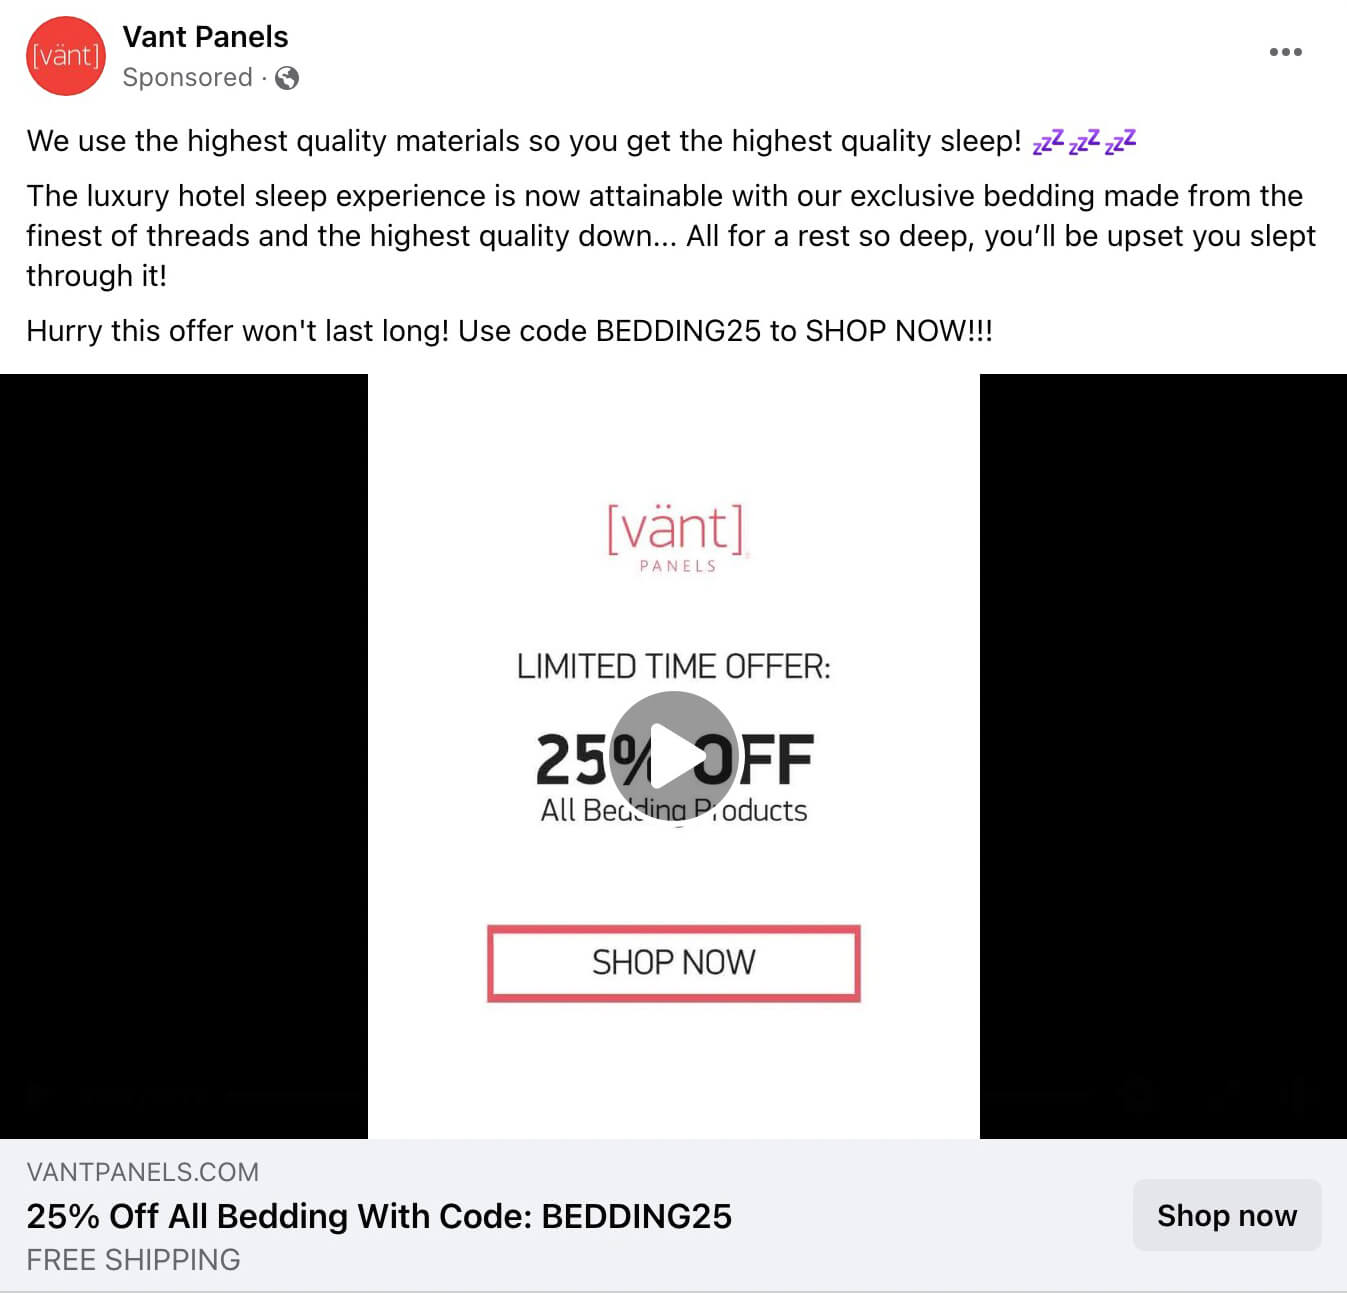 how-to-create-sales-ads-on-facebook-repetition-key-placements-to-make-promo-code-stand-out-caption-headline-vantpanels-example-19